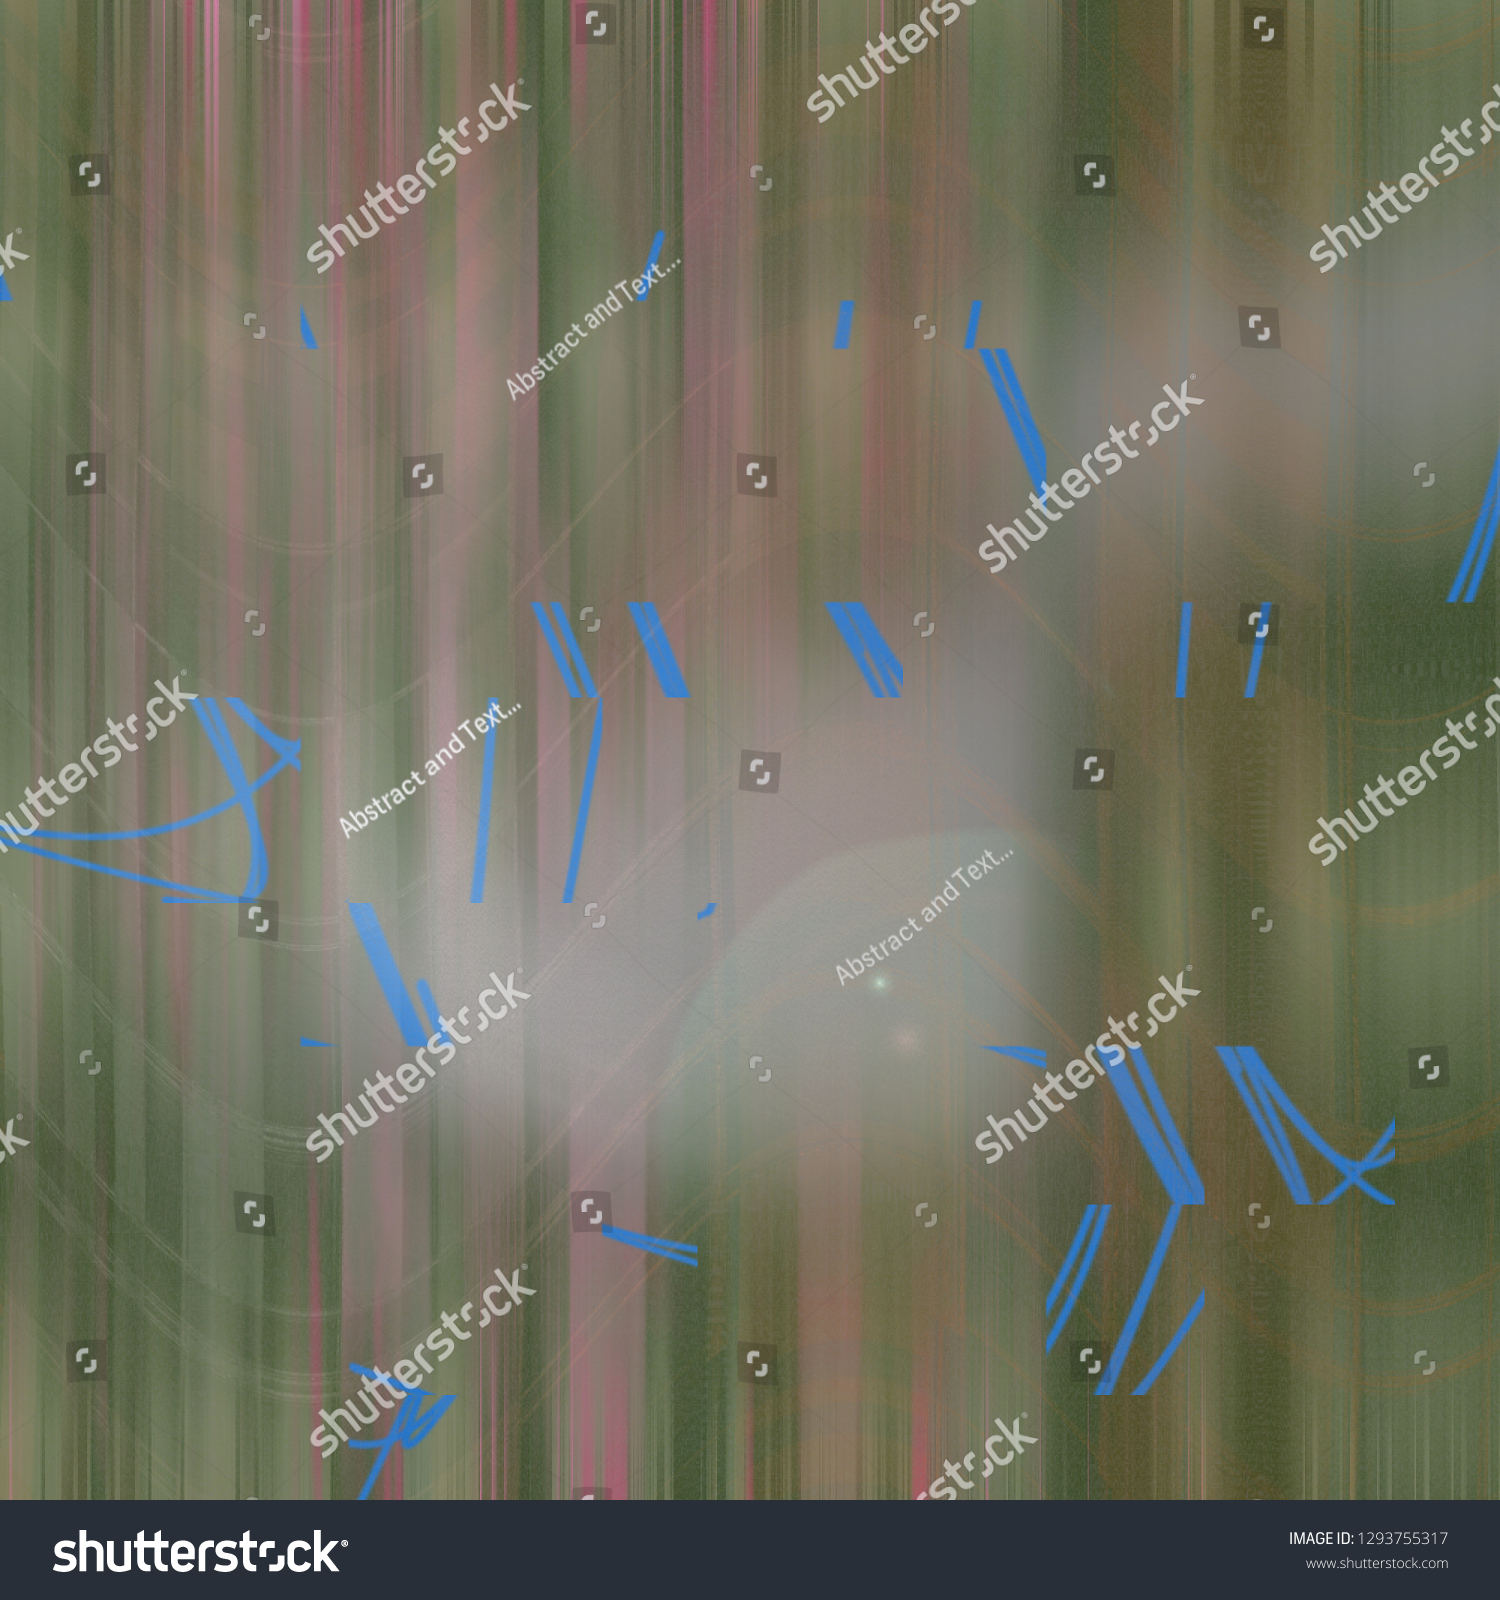 Background and abstract pattern design artwork. #1293755317